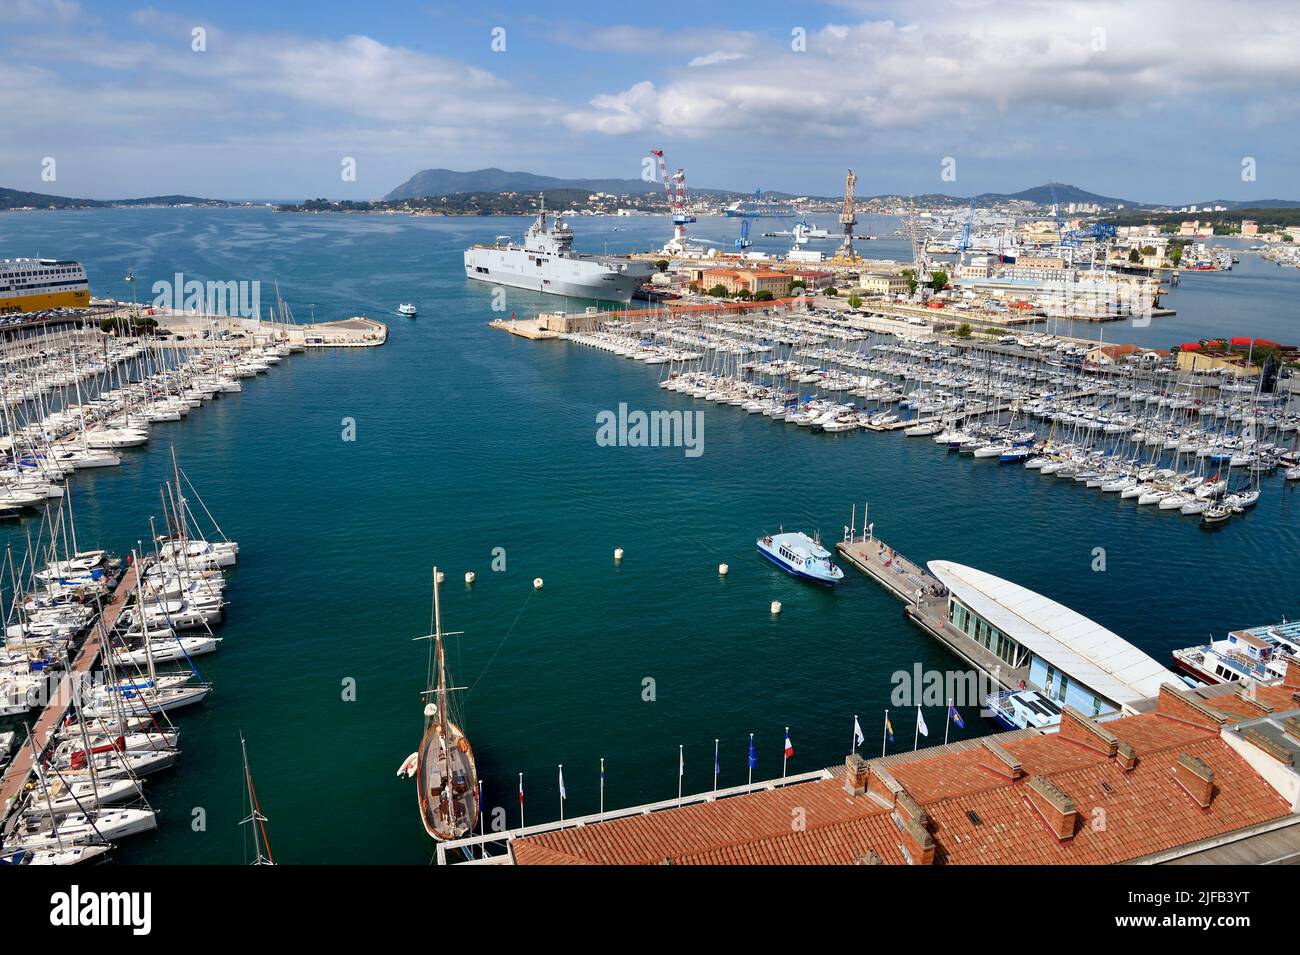 France, Var, Toulon, water bus pier of the Maritime Station quay Kronstadt on the civil port, the Mistral (L9013) amphibious helicopter carrier of the French Navy in the background in the naval base (Arsenal) Stock Photo